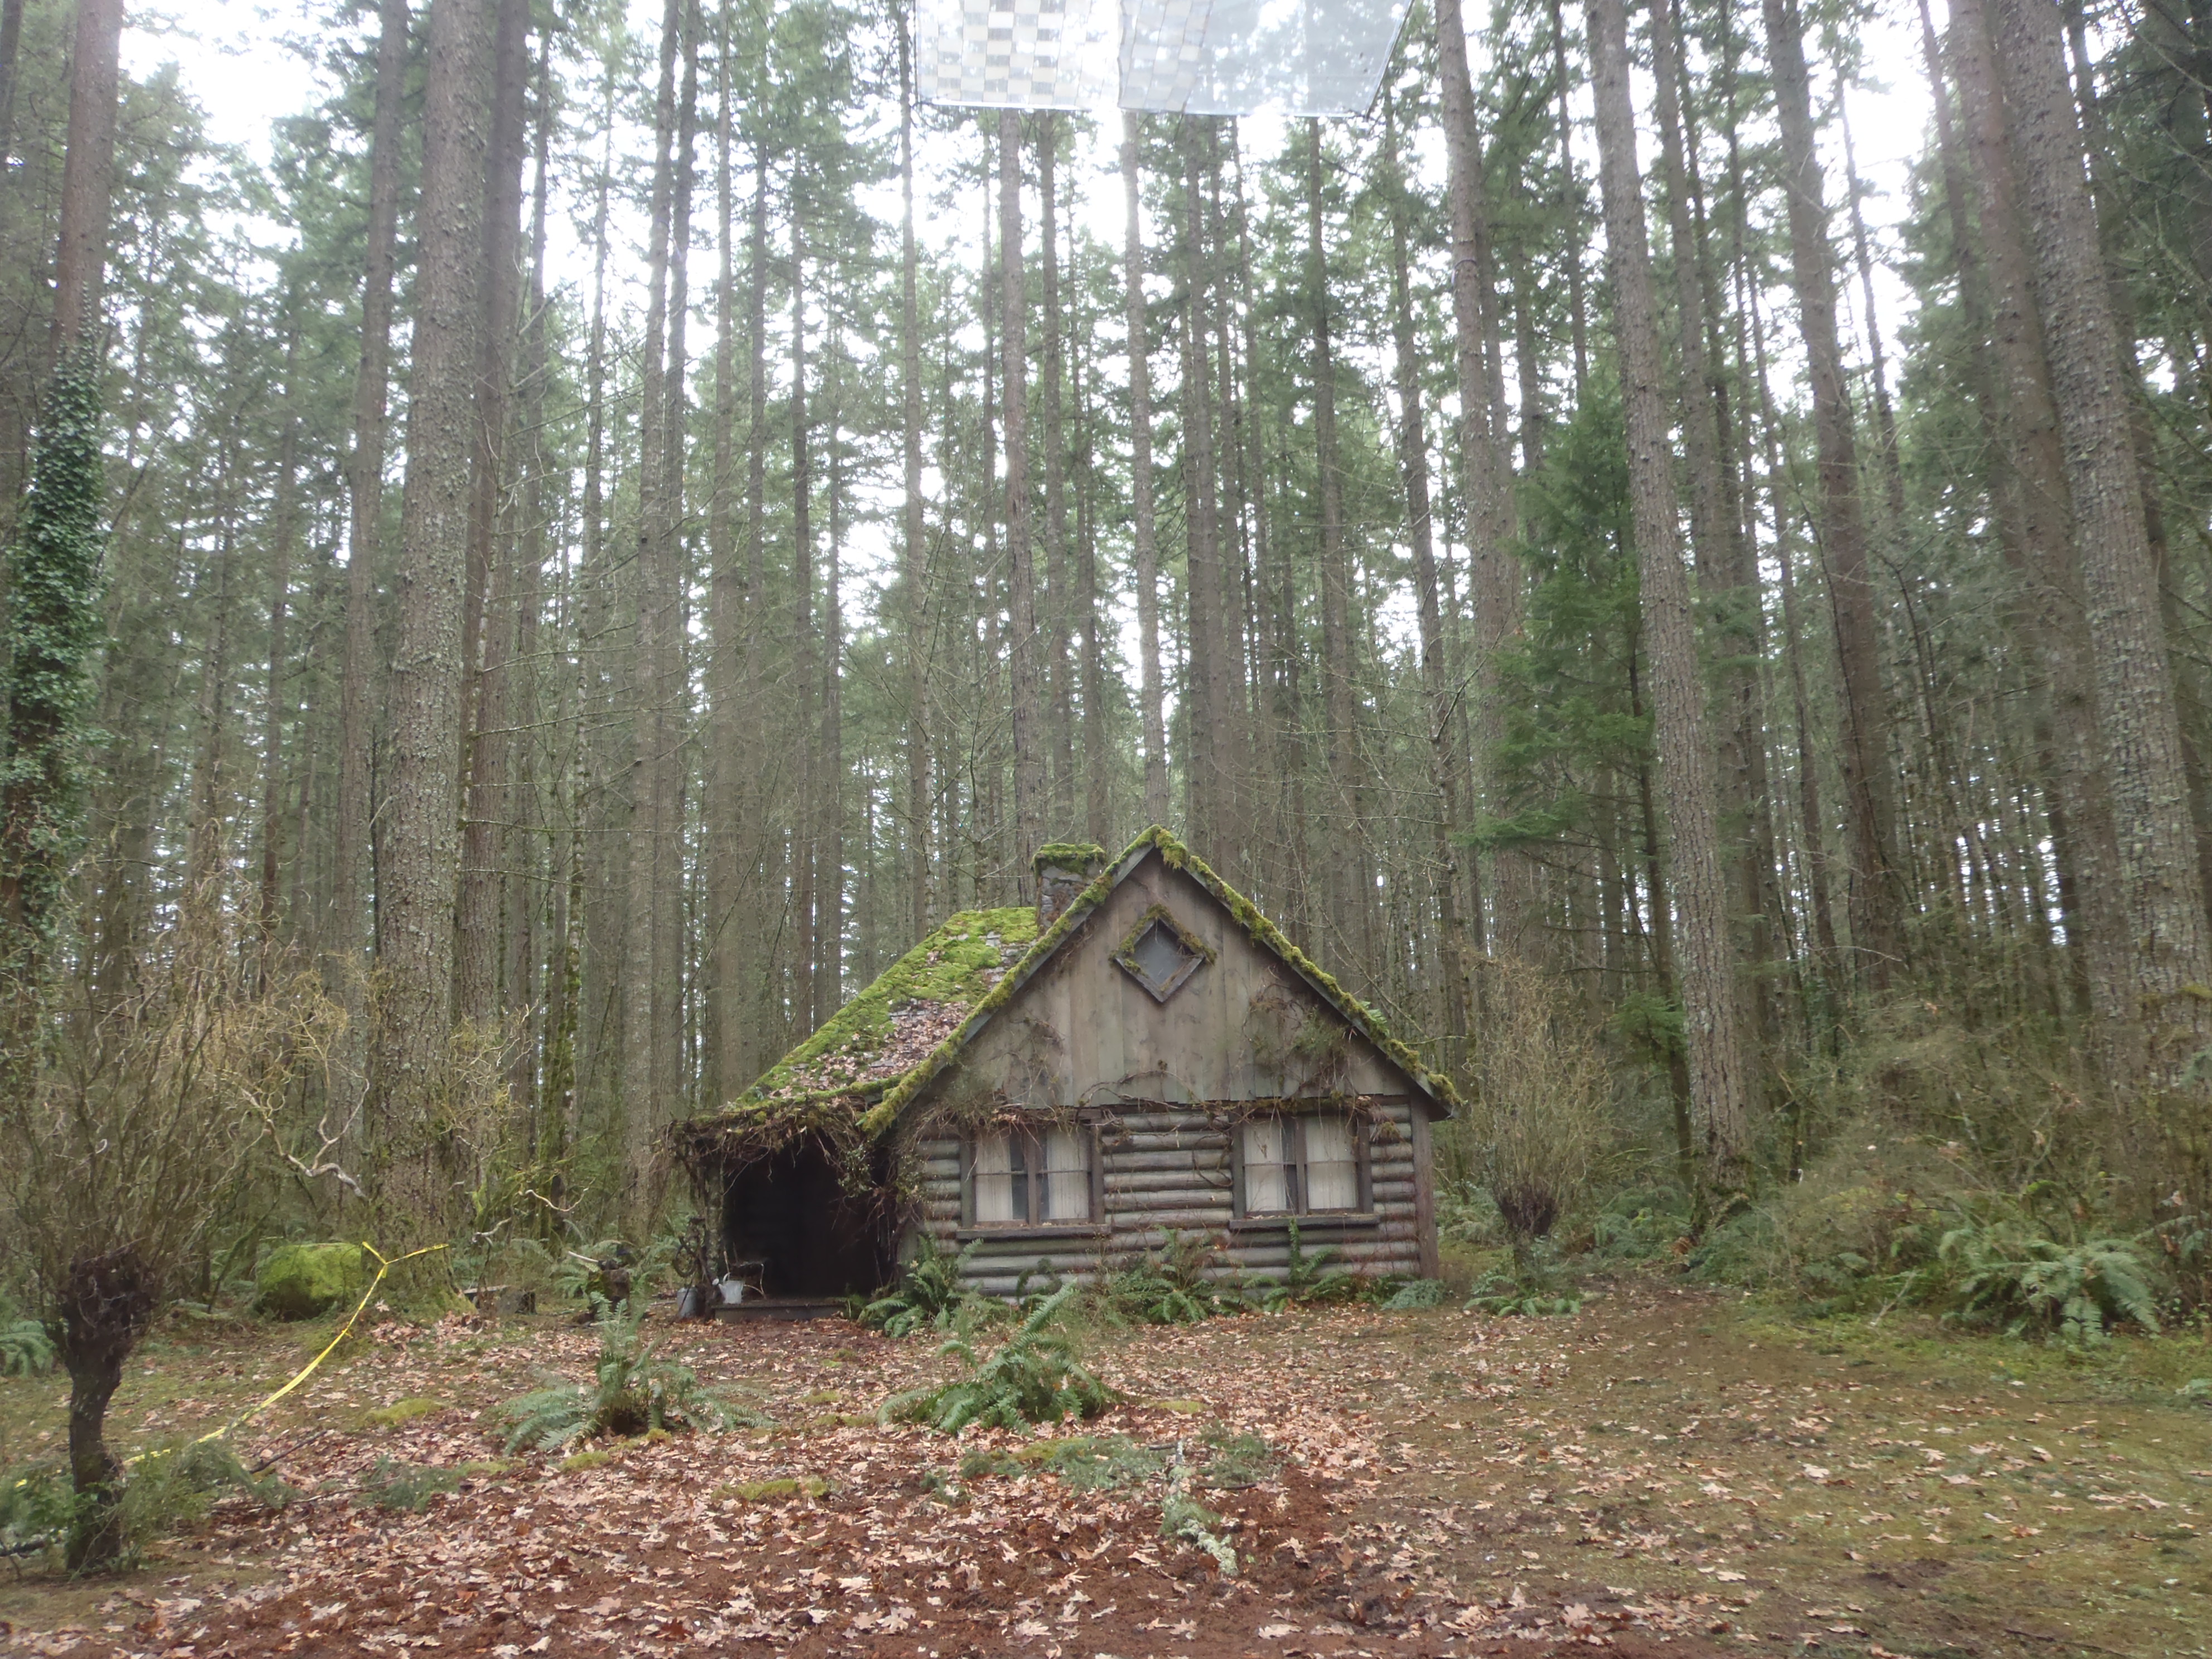 Grimm-The Forest Cabin